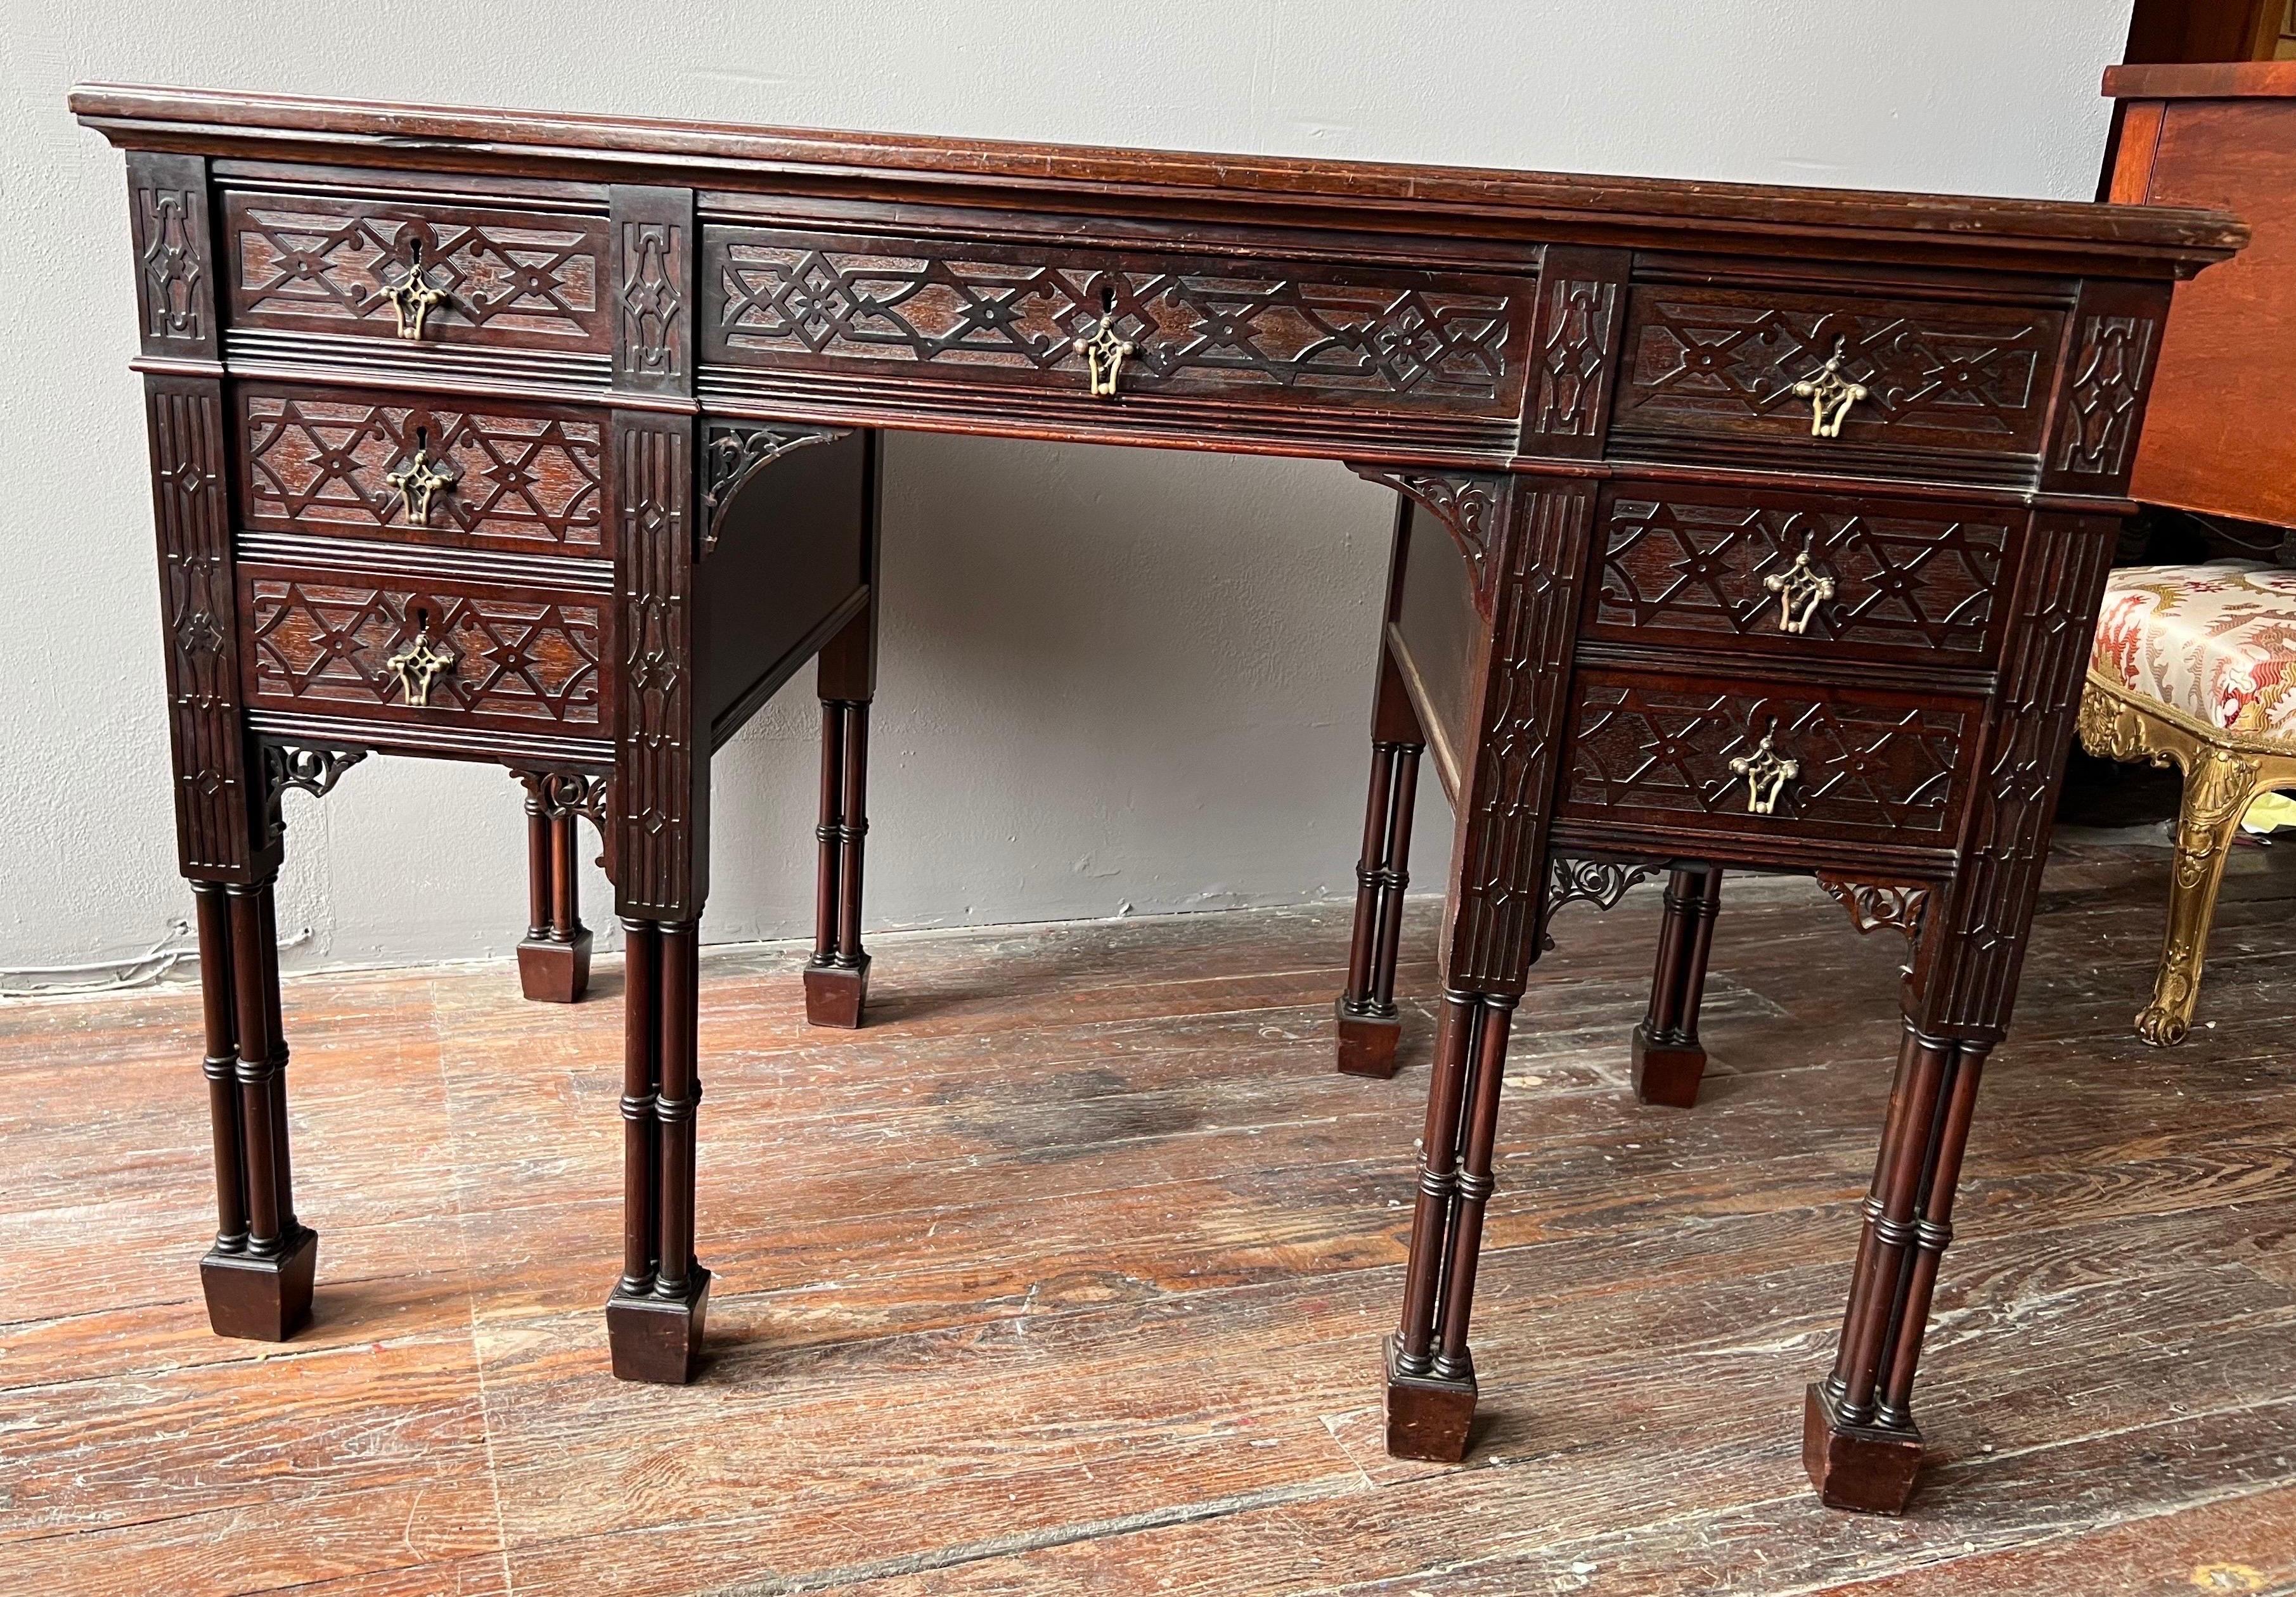 Fantastic quality 19th century Neo-Gothic leather top desk with faux bamboo cluster legs made by Edwards and Roberts. Paneled sides and back, Blind fretwork drawer fronts and the classic bamboo cluster legs. Stamped by the maker in the top of the